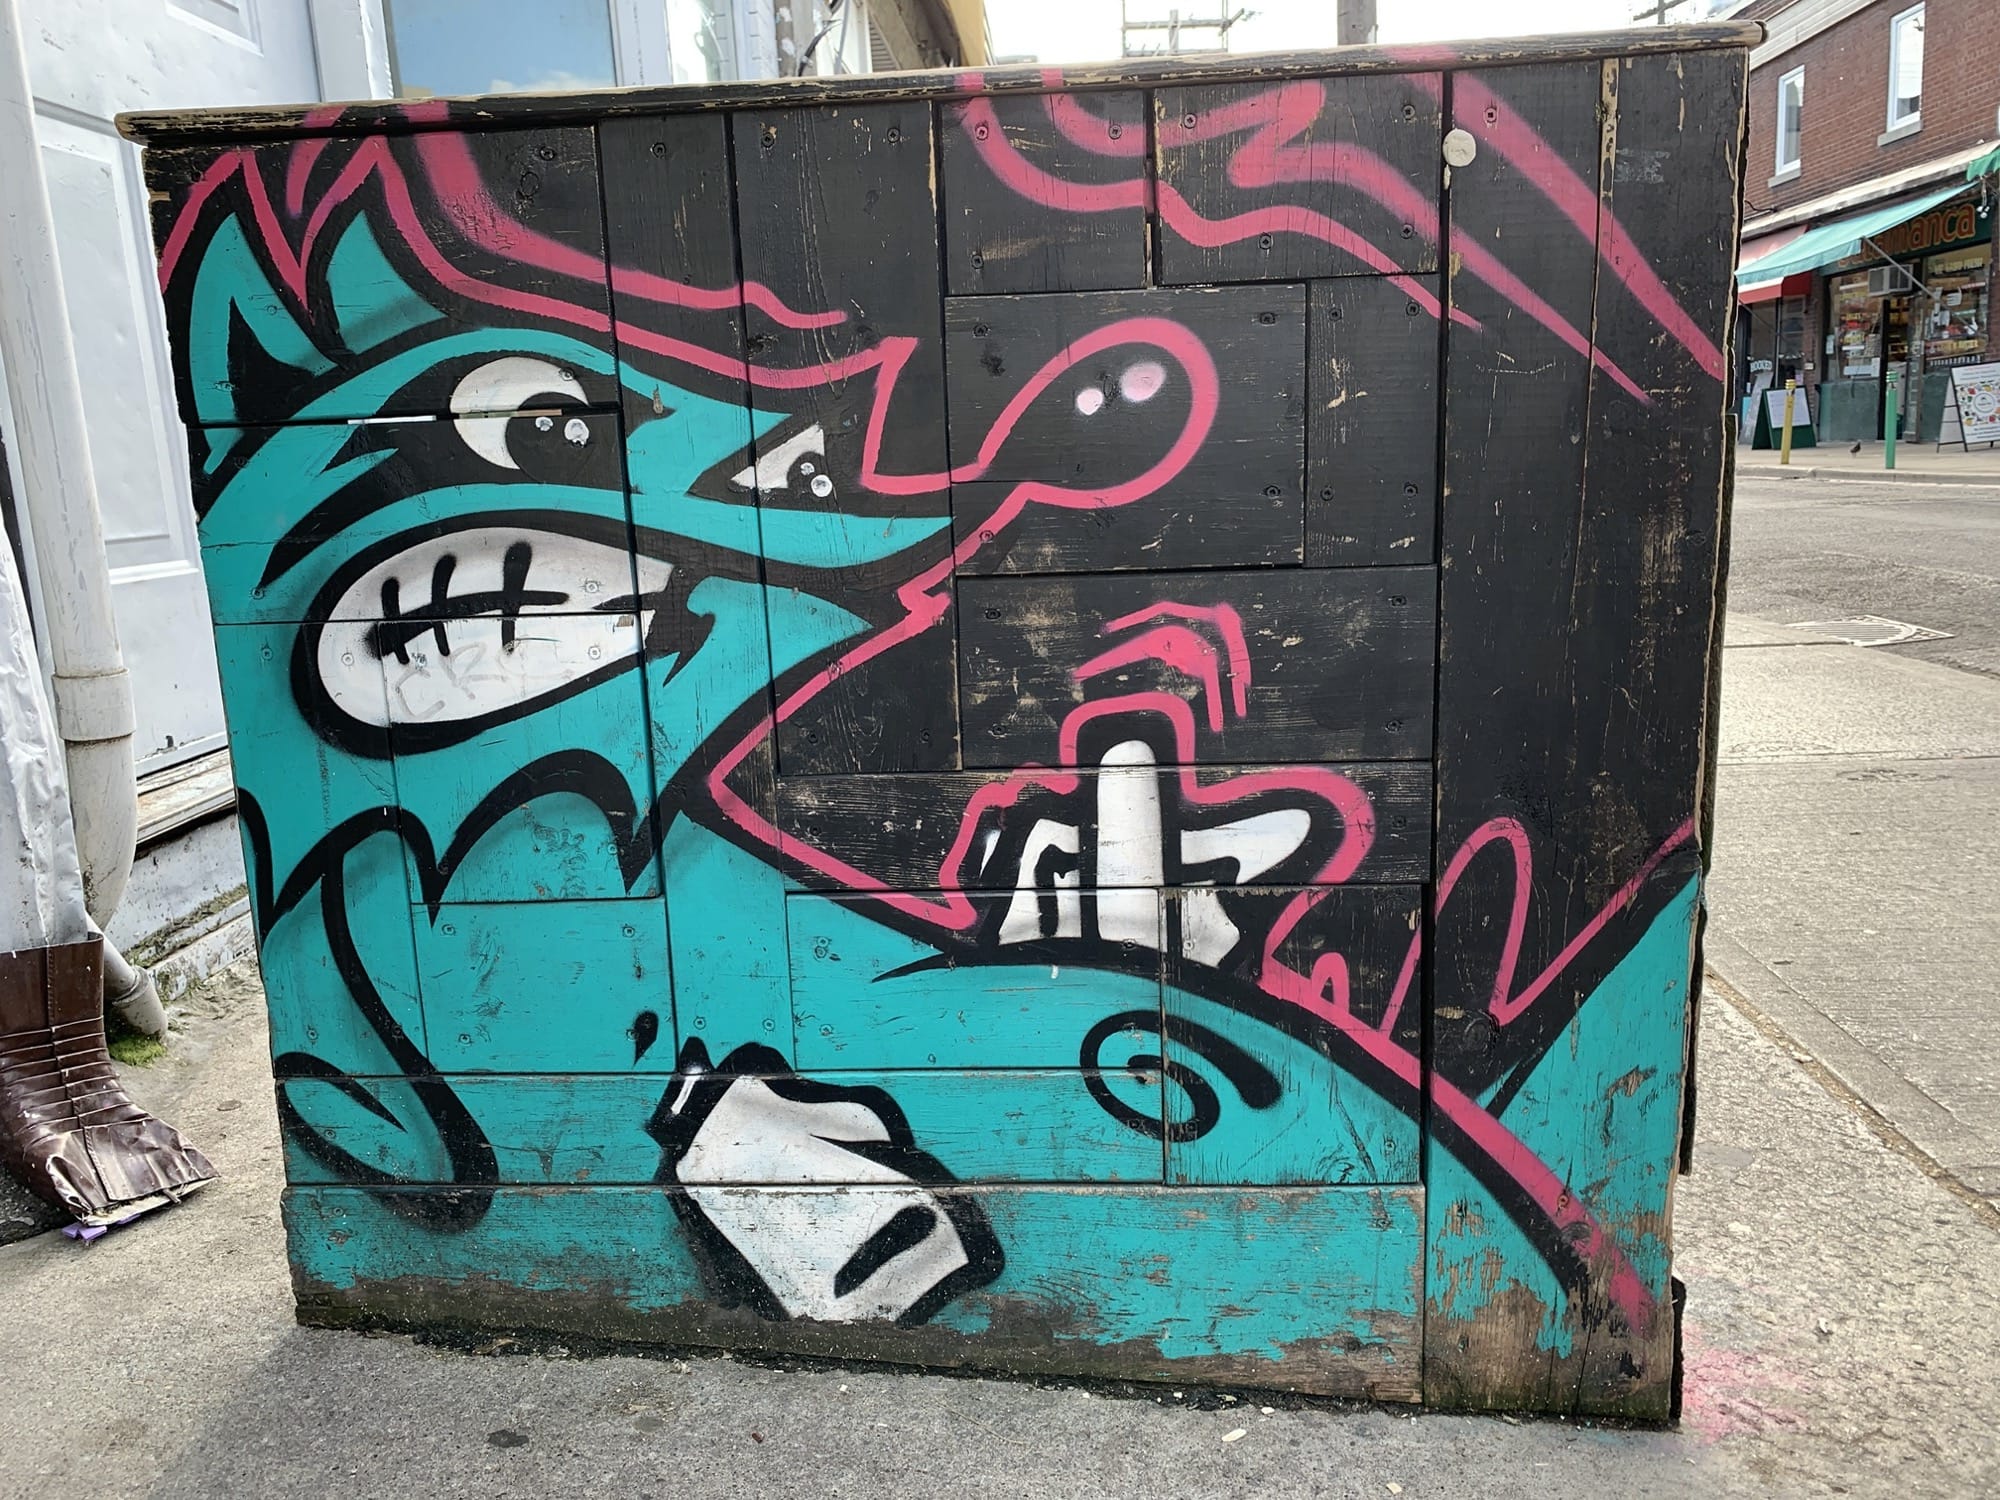 Graffiti 2415  captured by Rabot in Toronto Canada